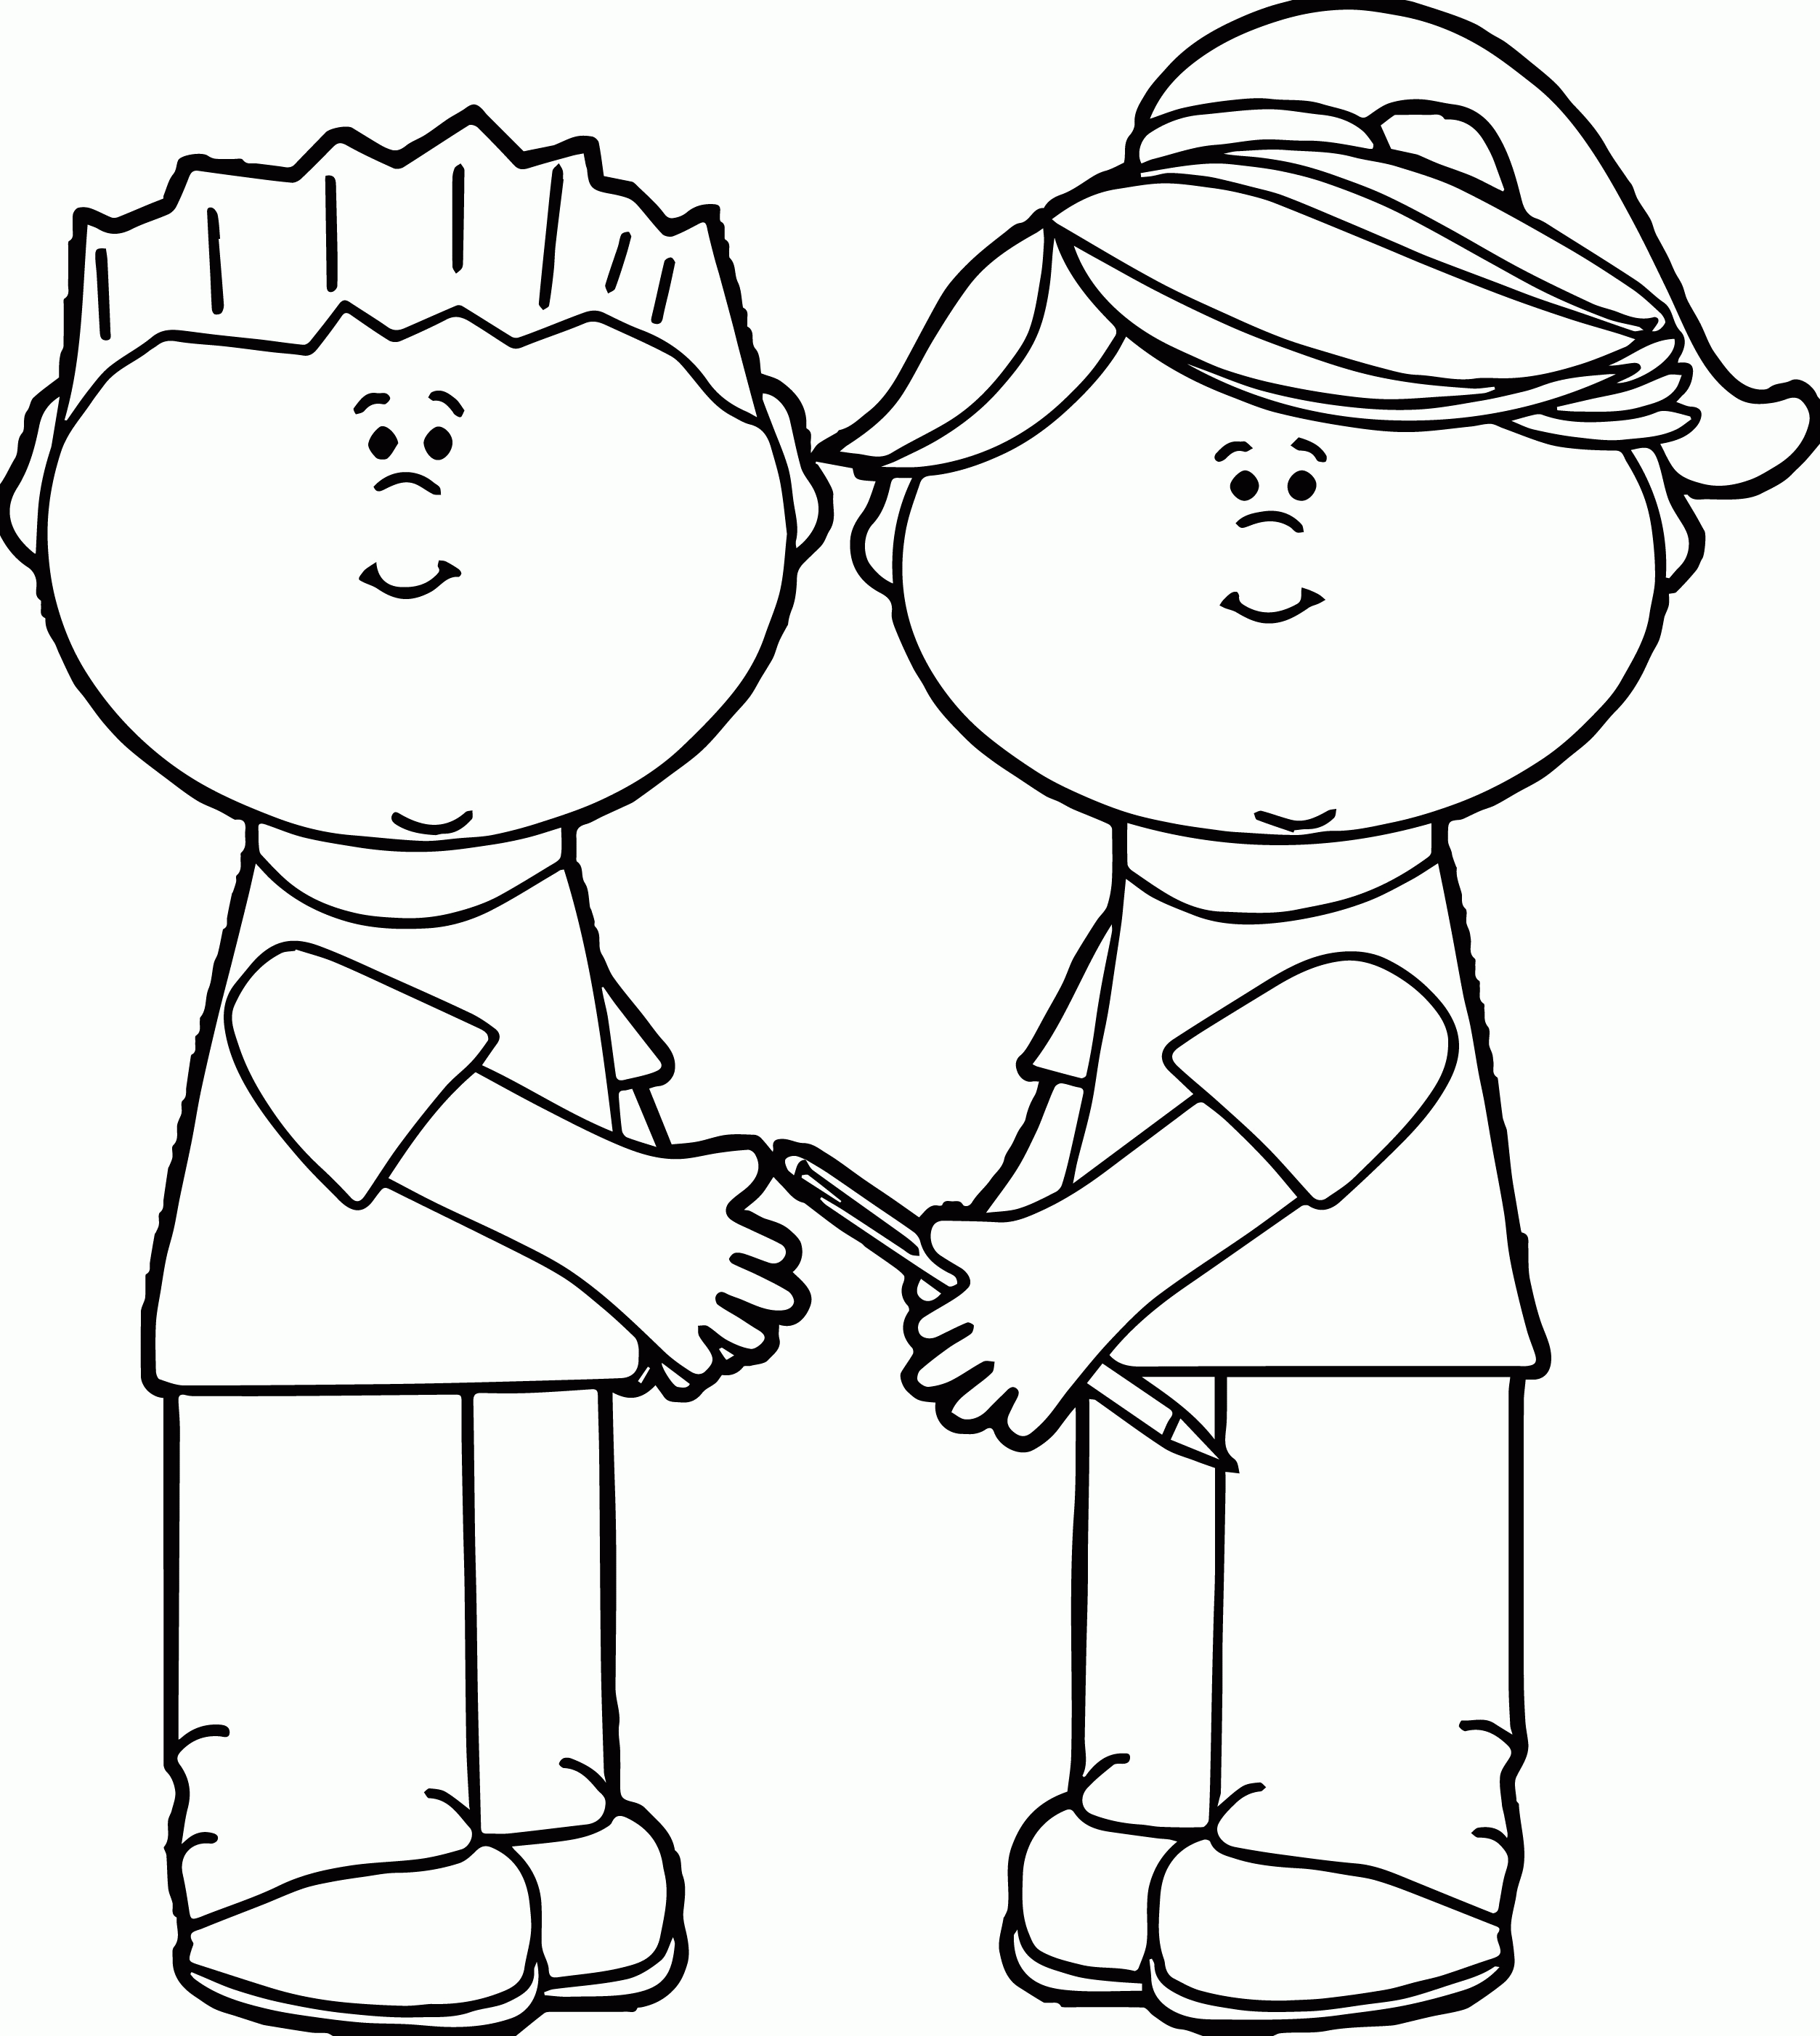 School Kids Sharing Kids We Coloring Page | Wecoloringpage